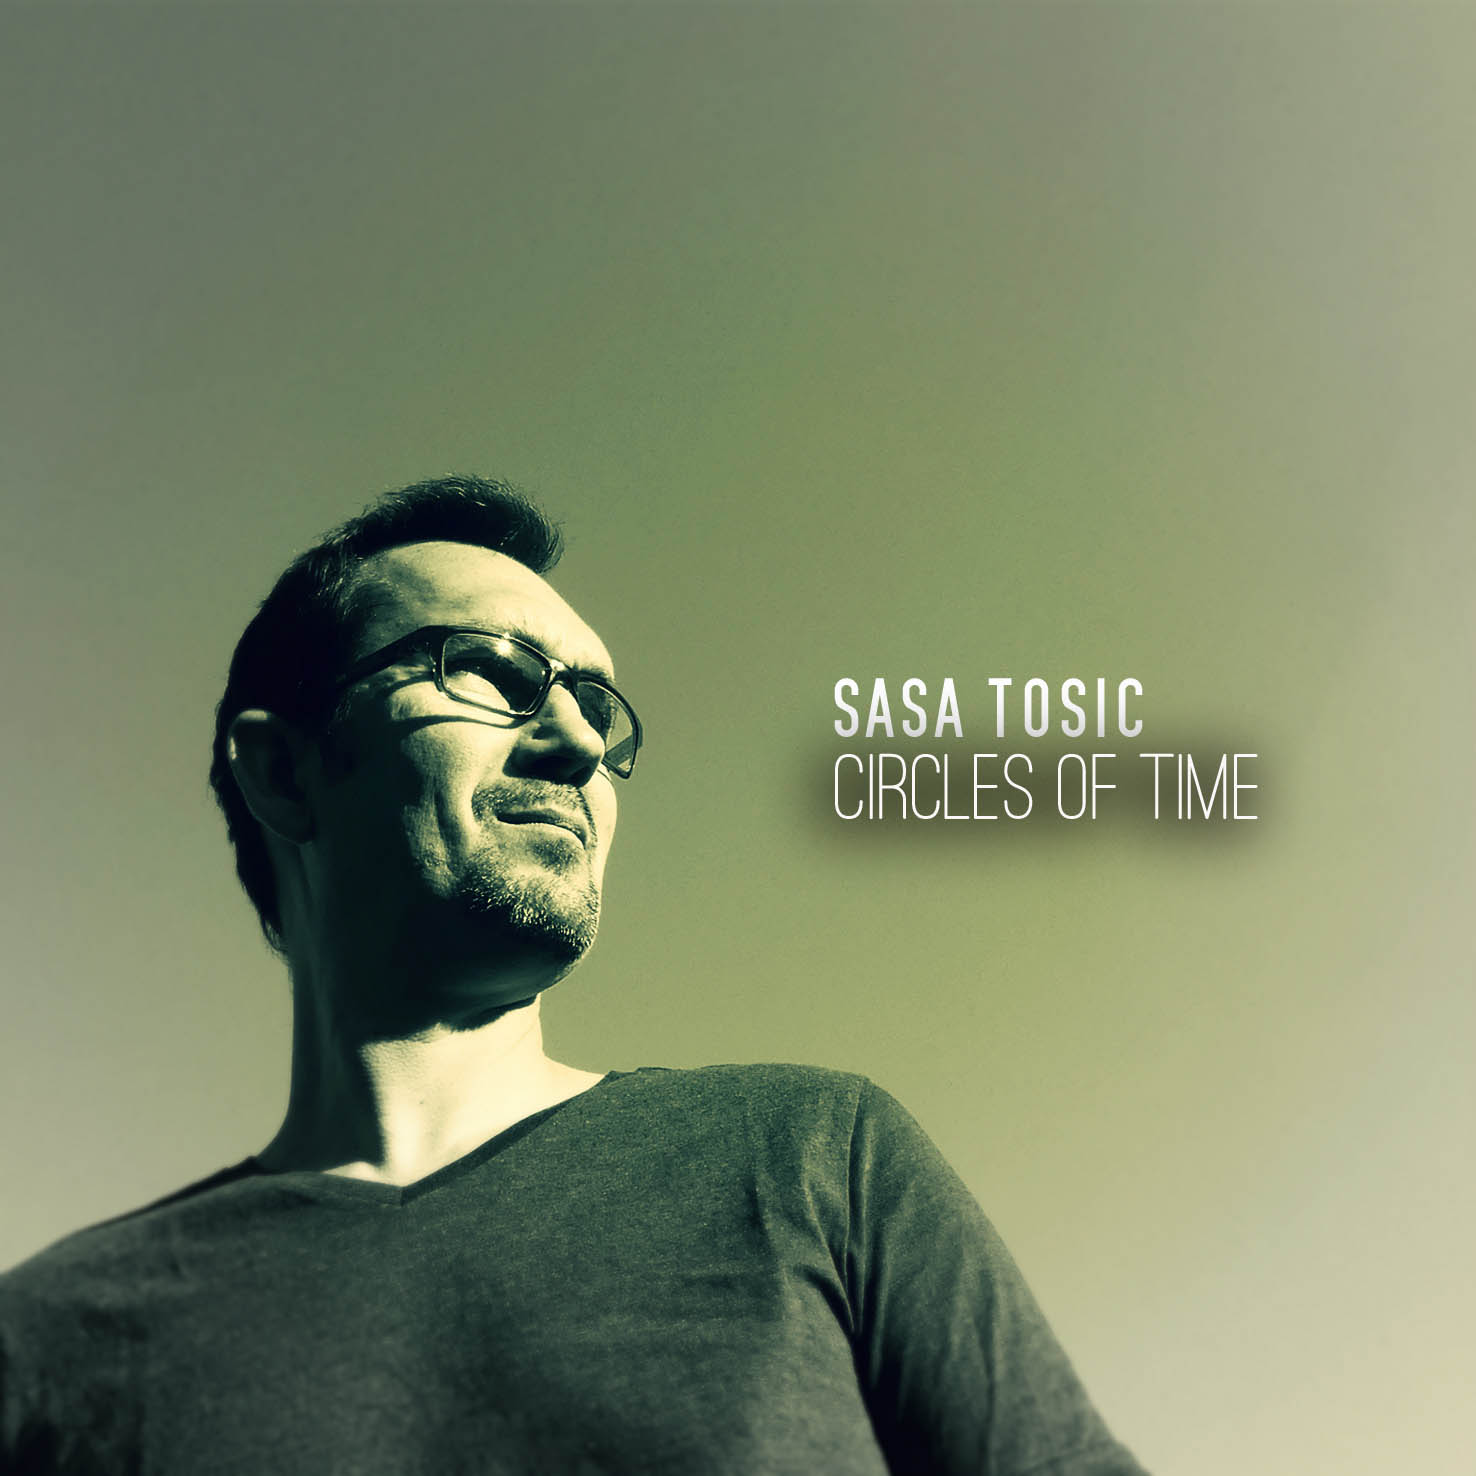 Premier-CD from Sasa Tosic 